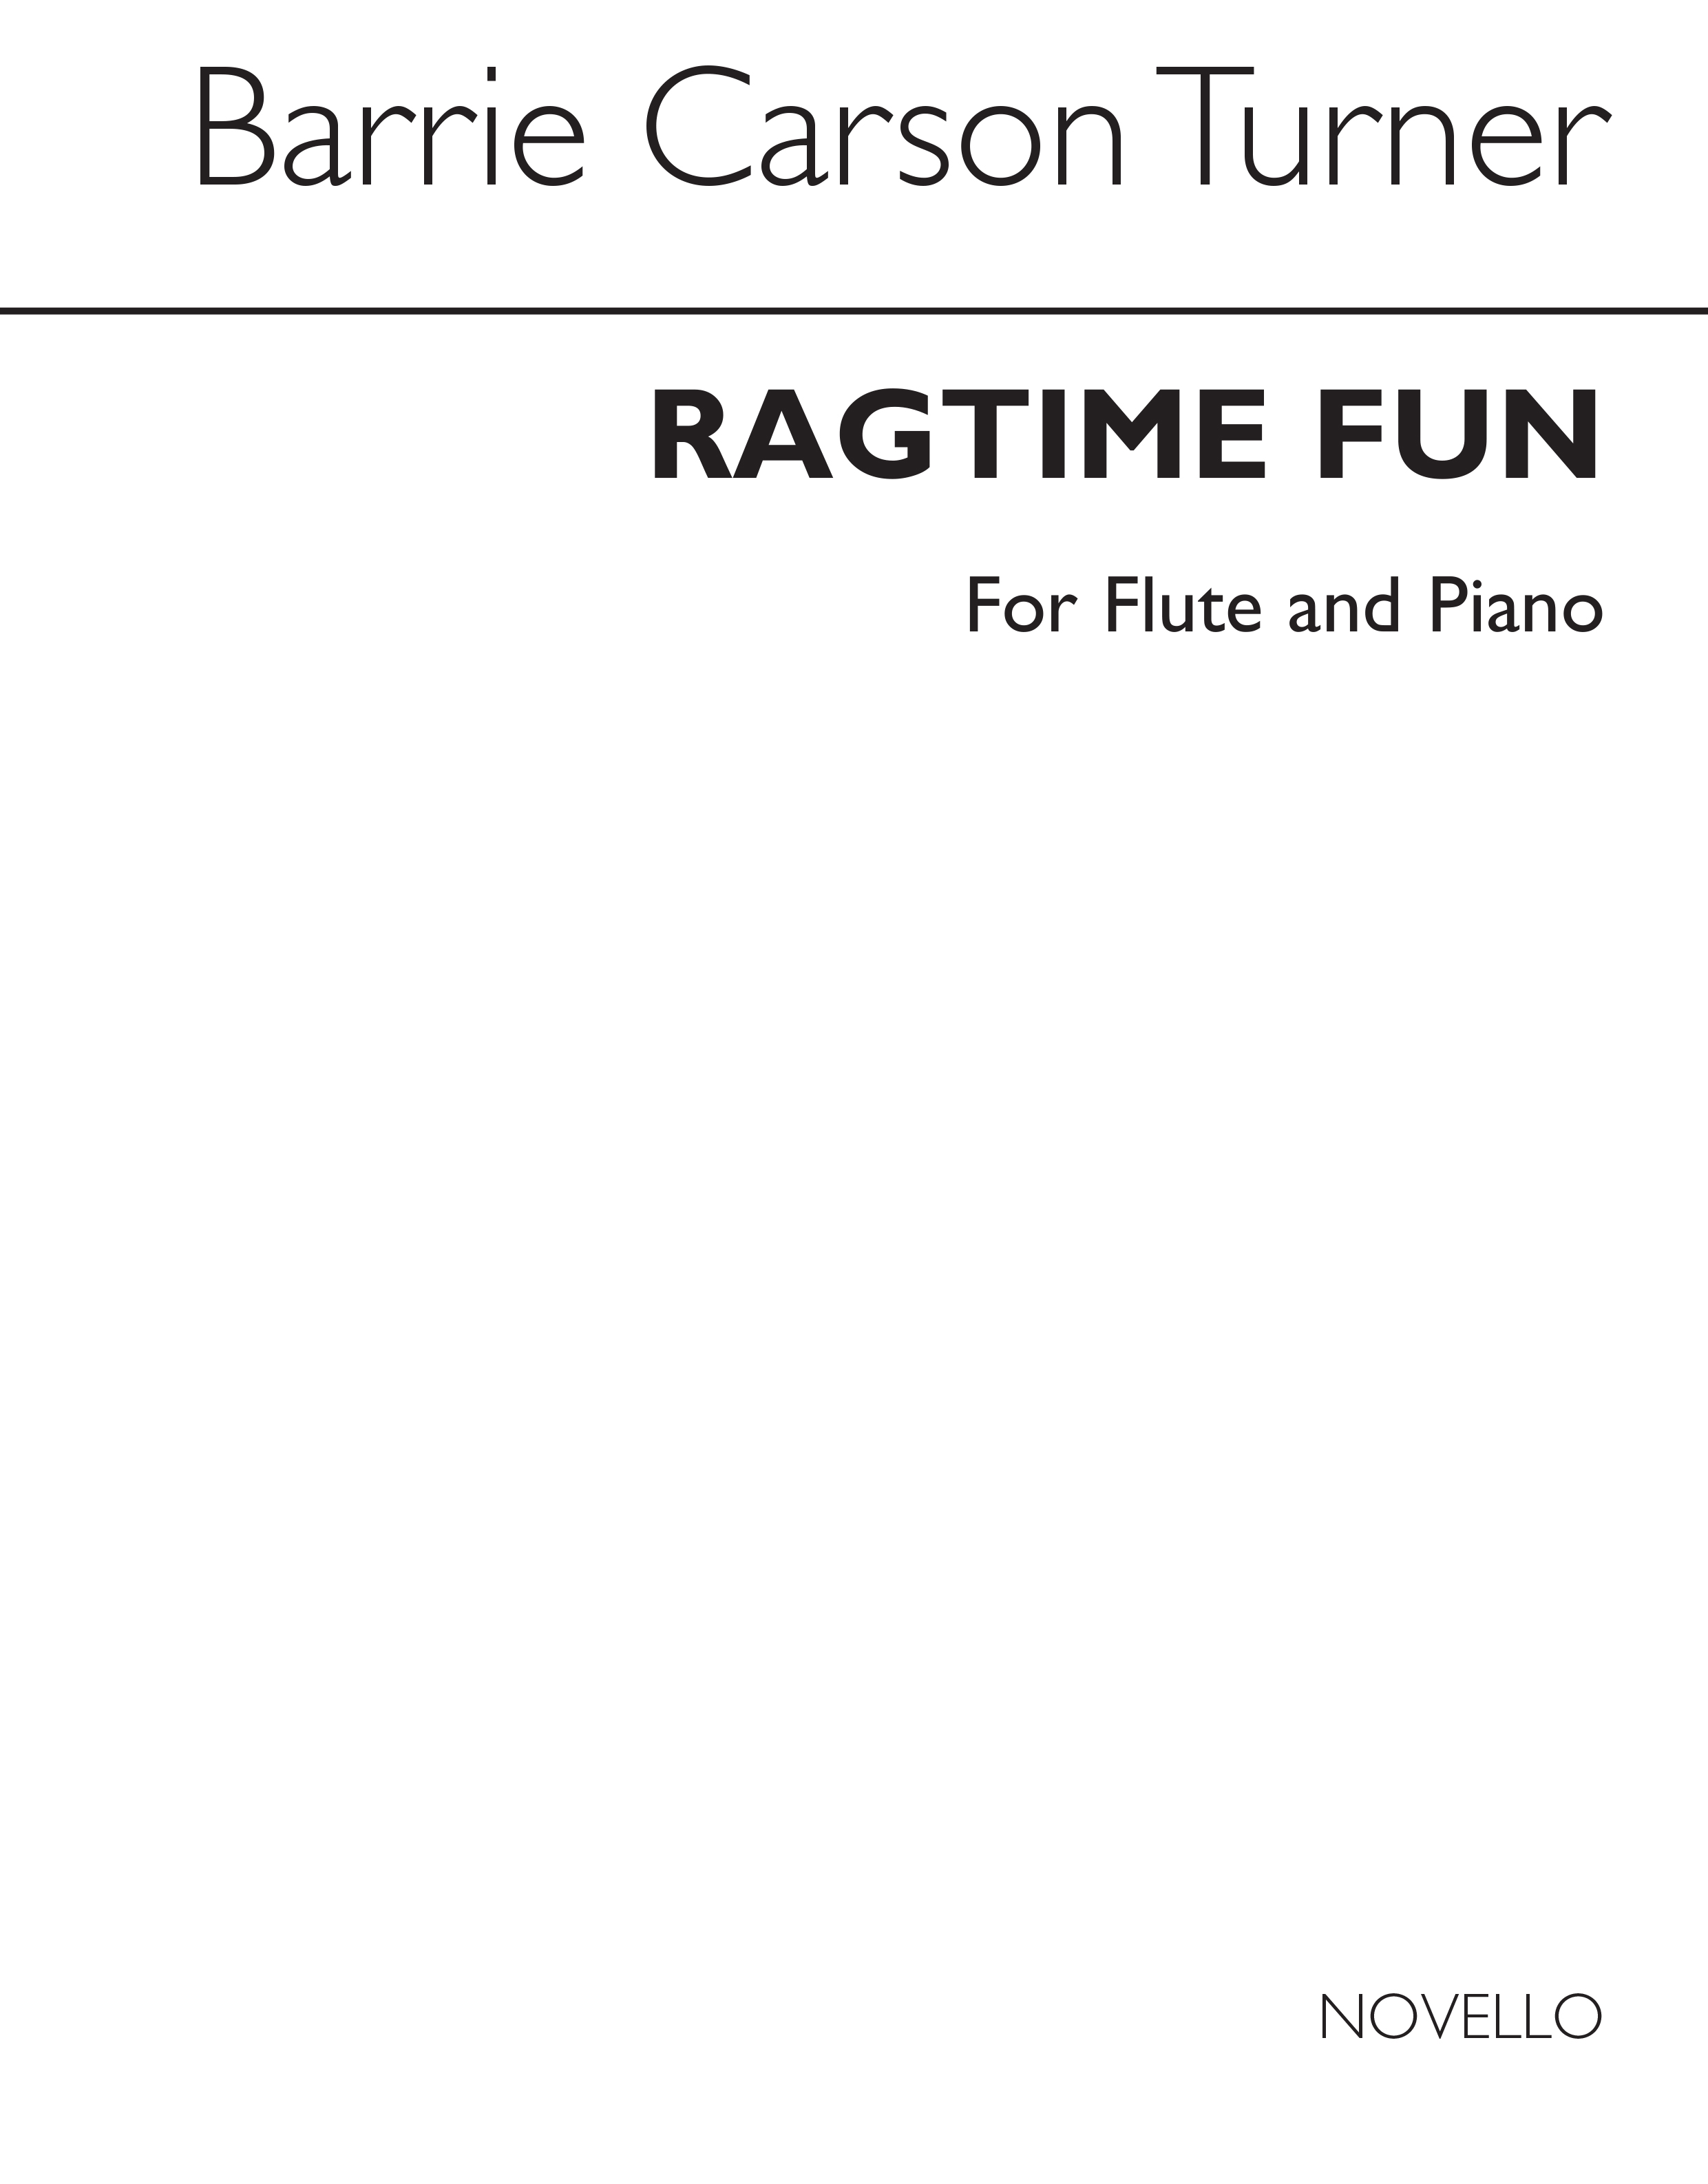 Ragtime Fun For Flute